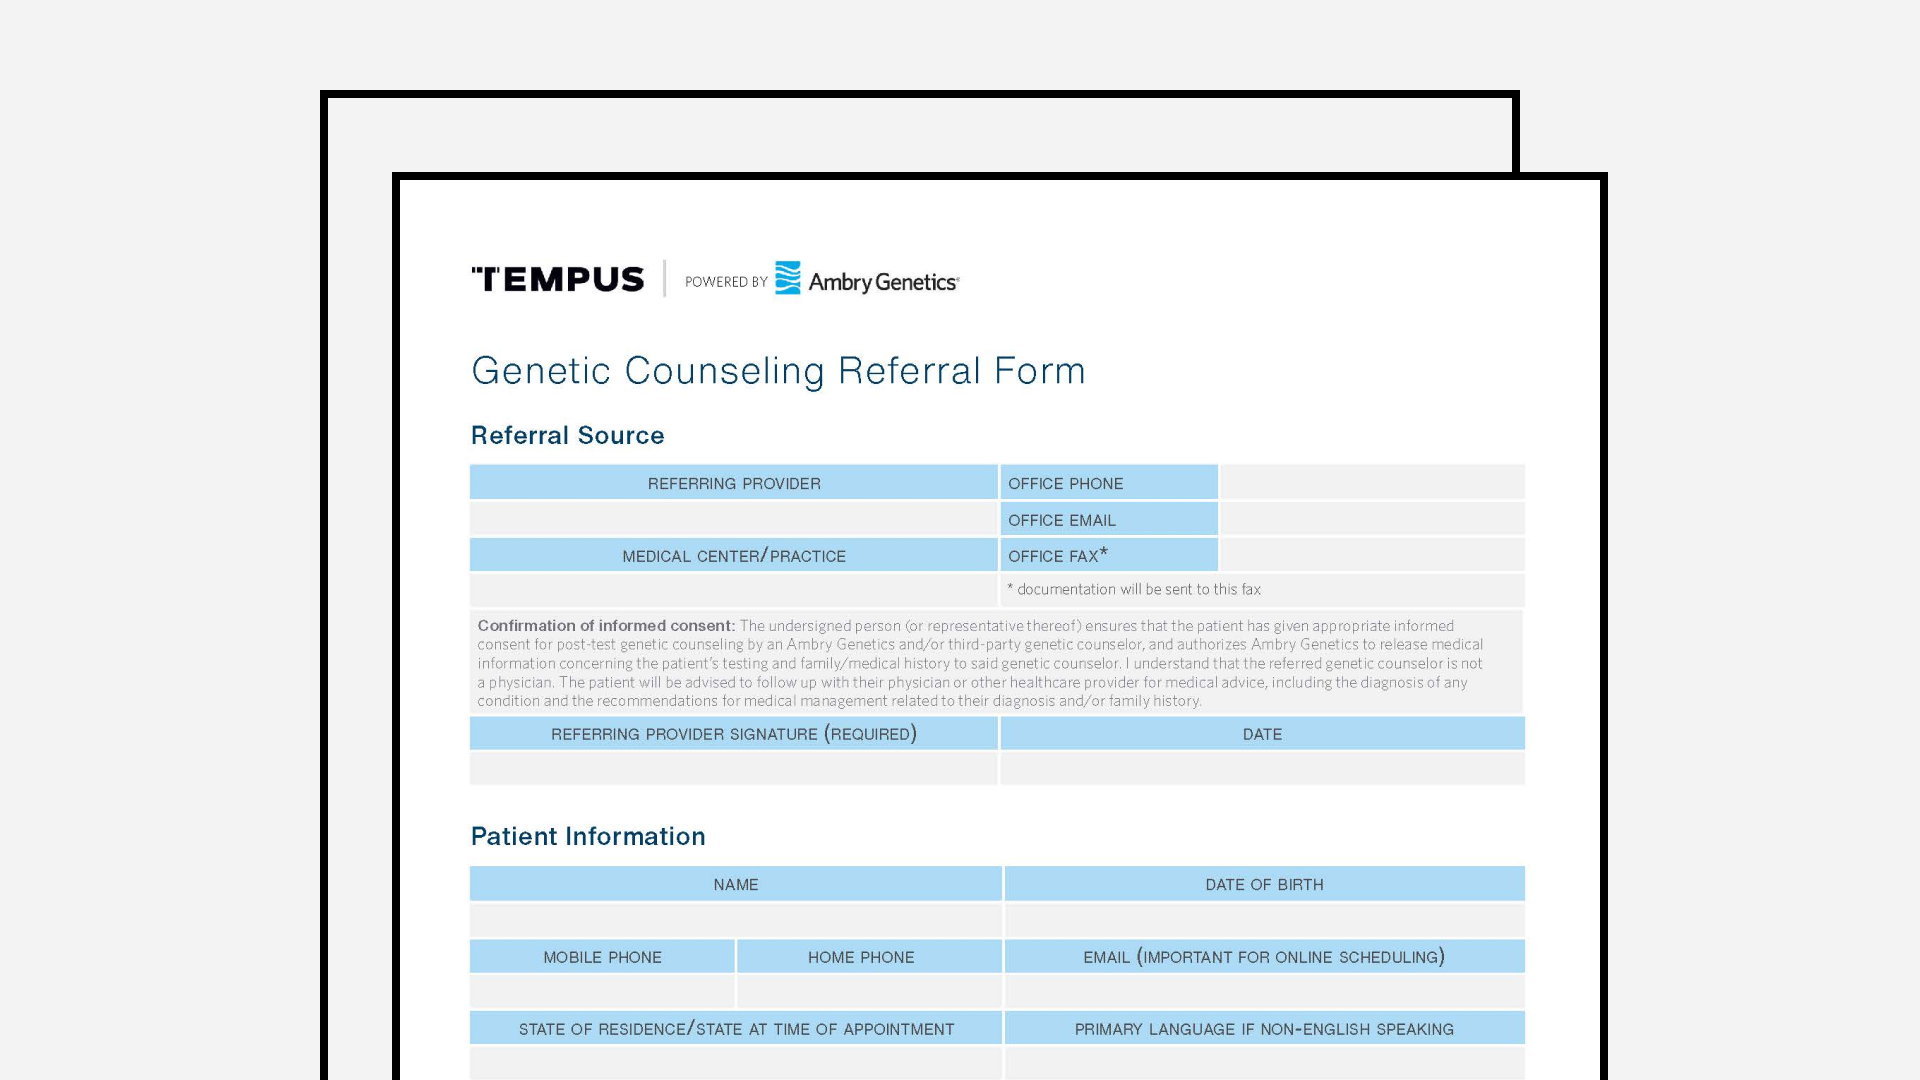 Ambry xG Genetic Counseling Referral Form